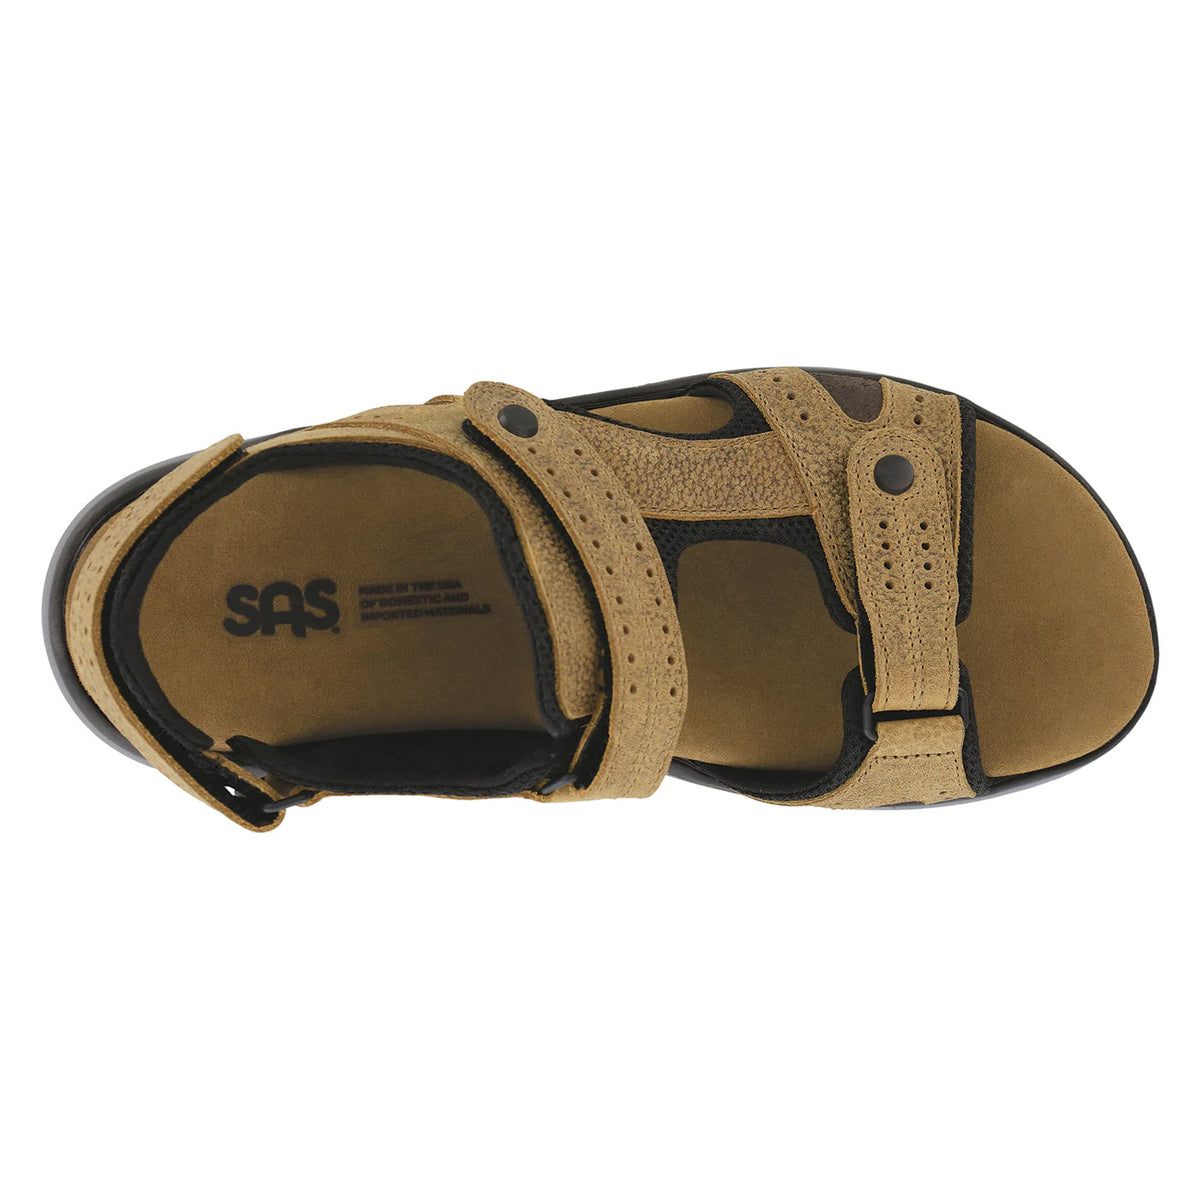 Top view of a single brown leather SAS Maverick Sandal Stampede Sand - Mens with open-toe design and shock-absorbing sole, positioned on a white background.